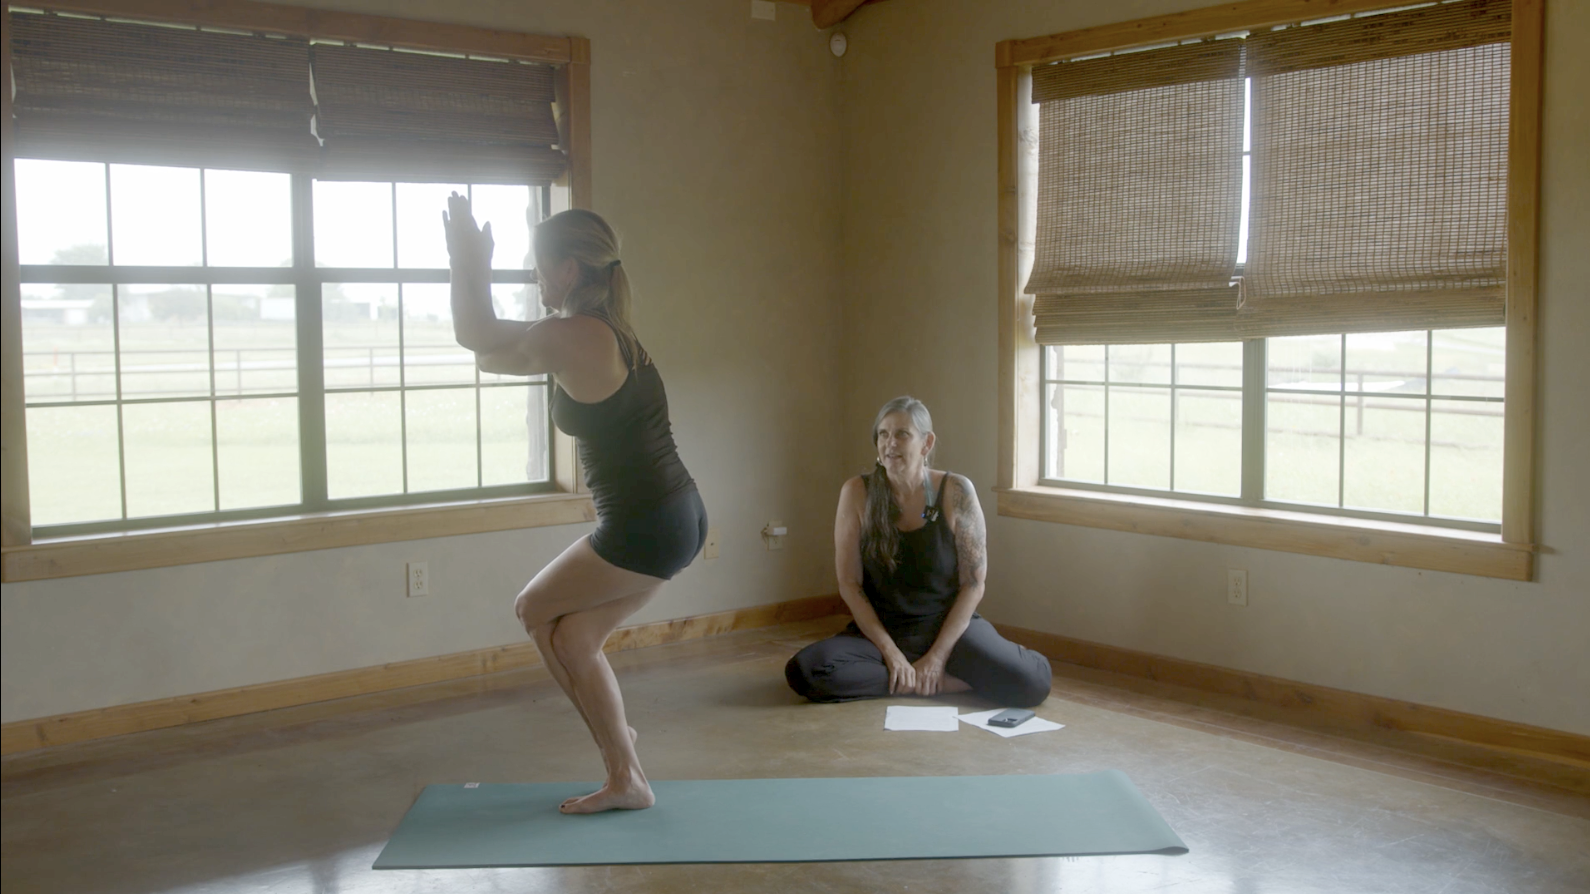 Check out what's new on Holy Yoga TV this week!